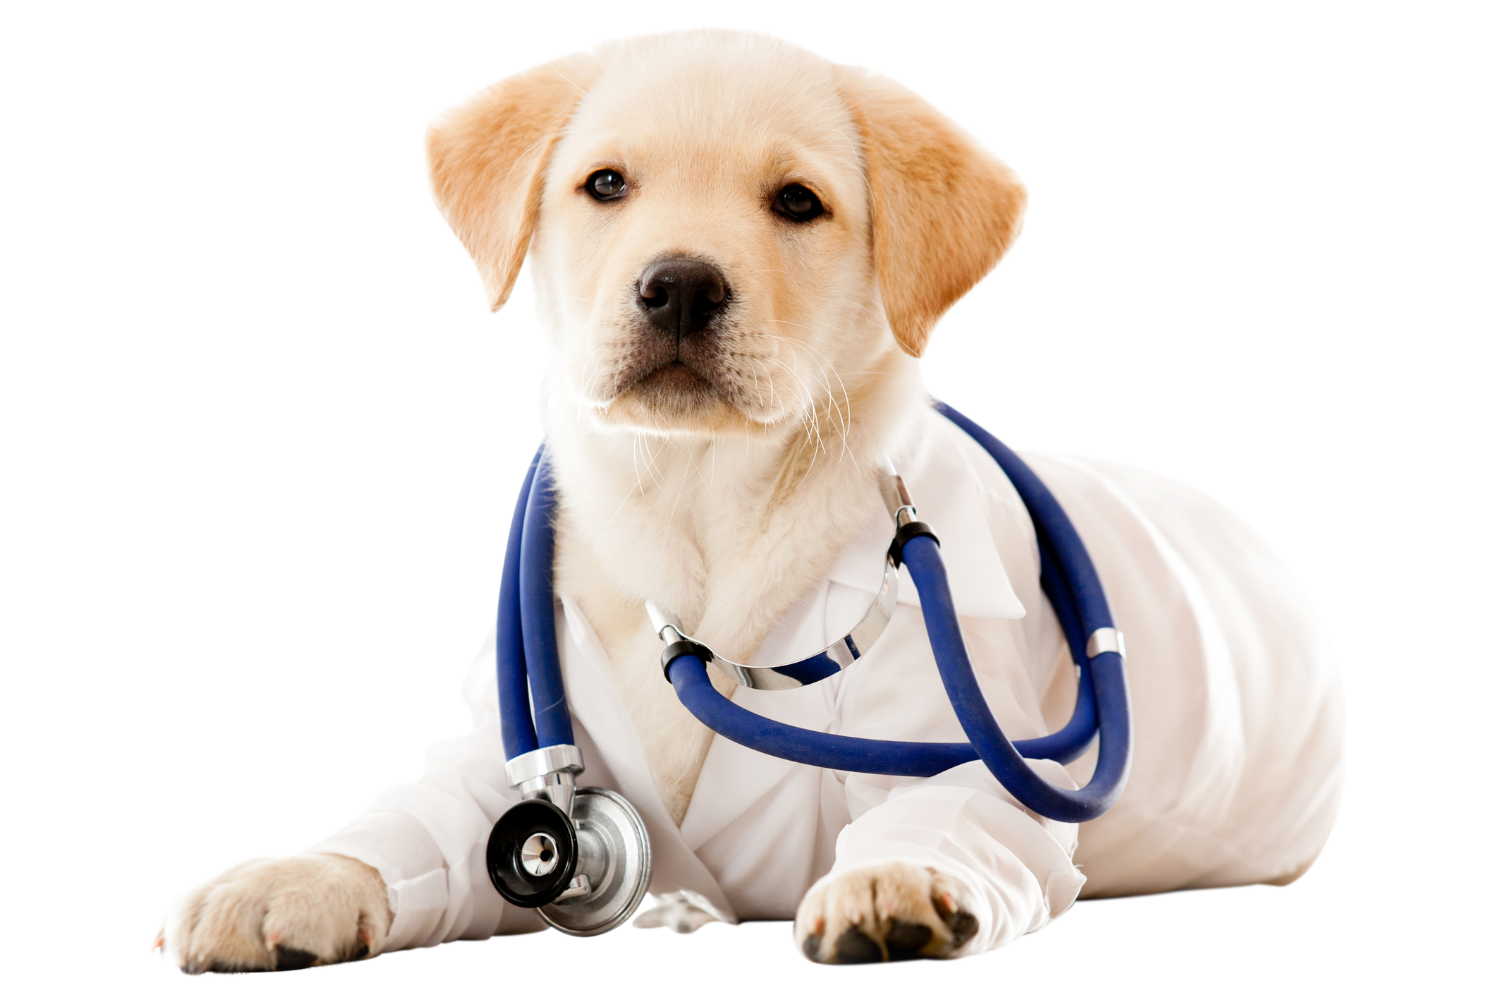 A Dog Wearing a Stethoscope Around its Neck